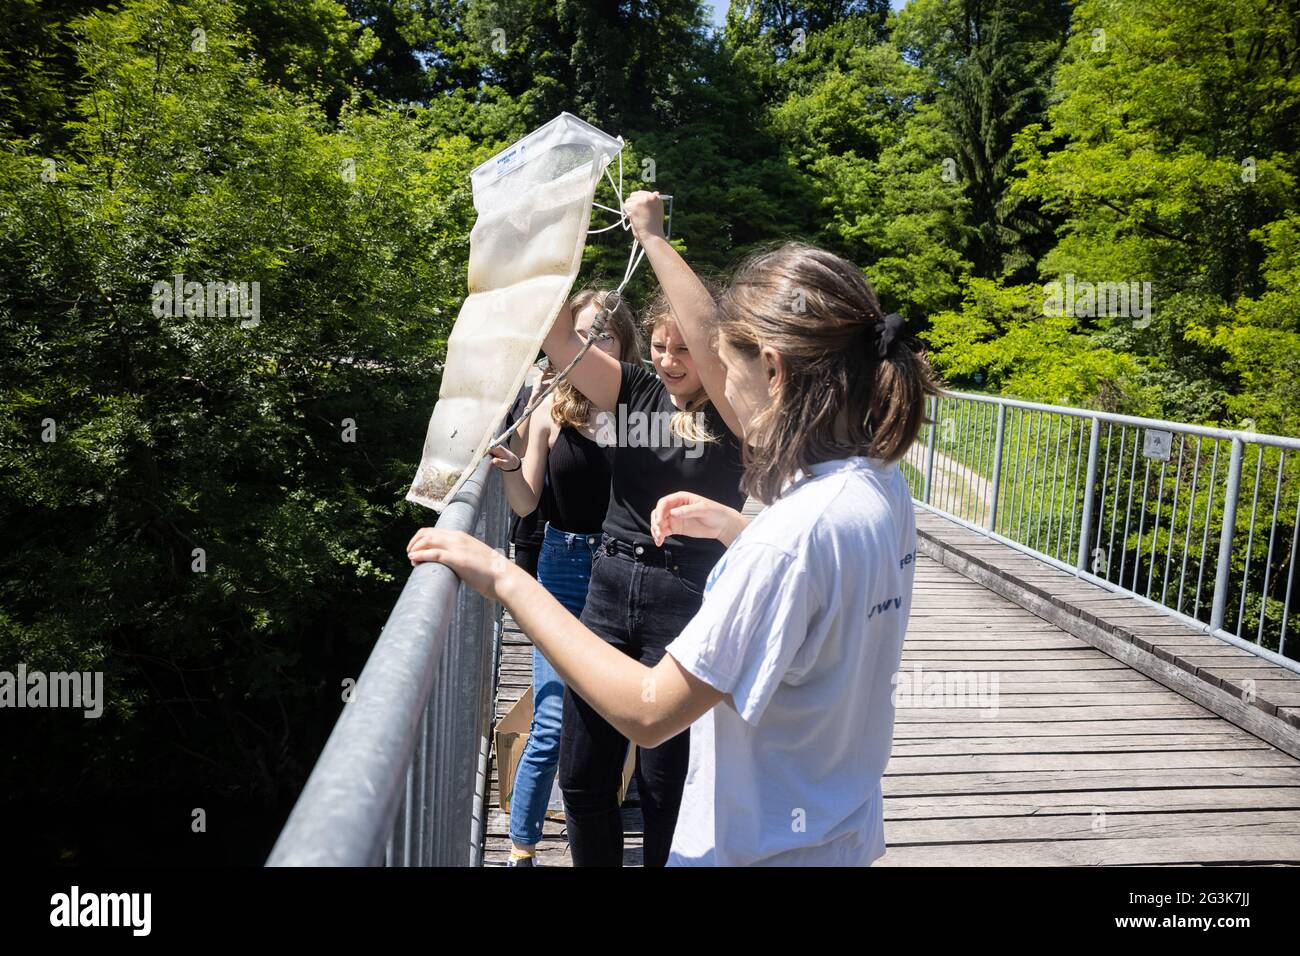 School children pull a net for collecting microplastic from the Kokra river in Kranj, Slovenia, as they participate in the Plastic Pirates - Go Europe! project.The international project Plastic Pirates - Go Europe! is an international citizen science campaign launched by the ministries of education, science and research of Germany, Portugal and Slovenia, which is taking place during their Trio Presidency of the Council of the European Union. It calls upon children and adolescents aged 10 to 16 to investigate waste, particularly plastic waste in and near bodies of water. (Photo by Luka Dakskobl Stock Photo